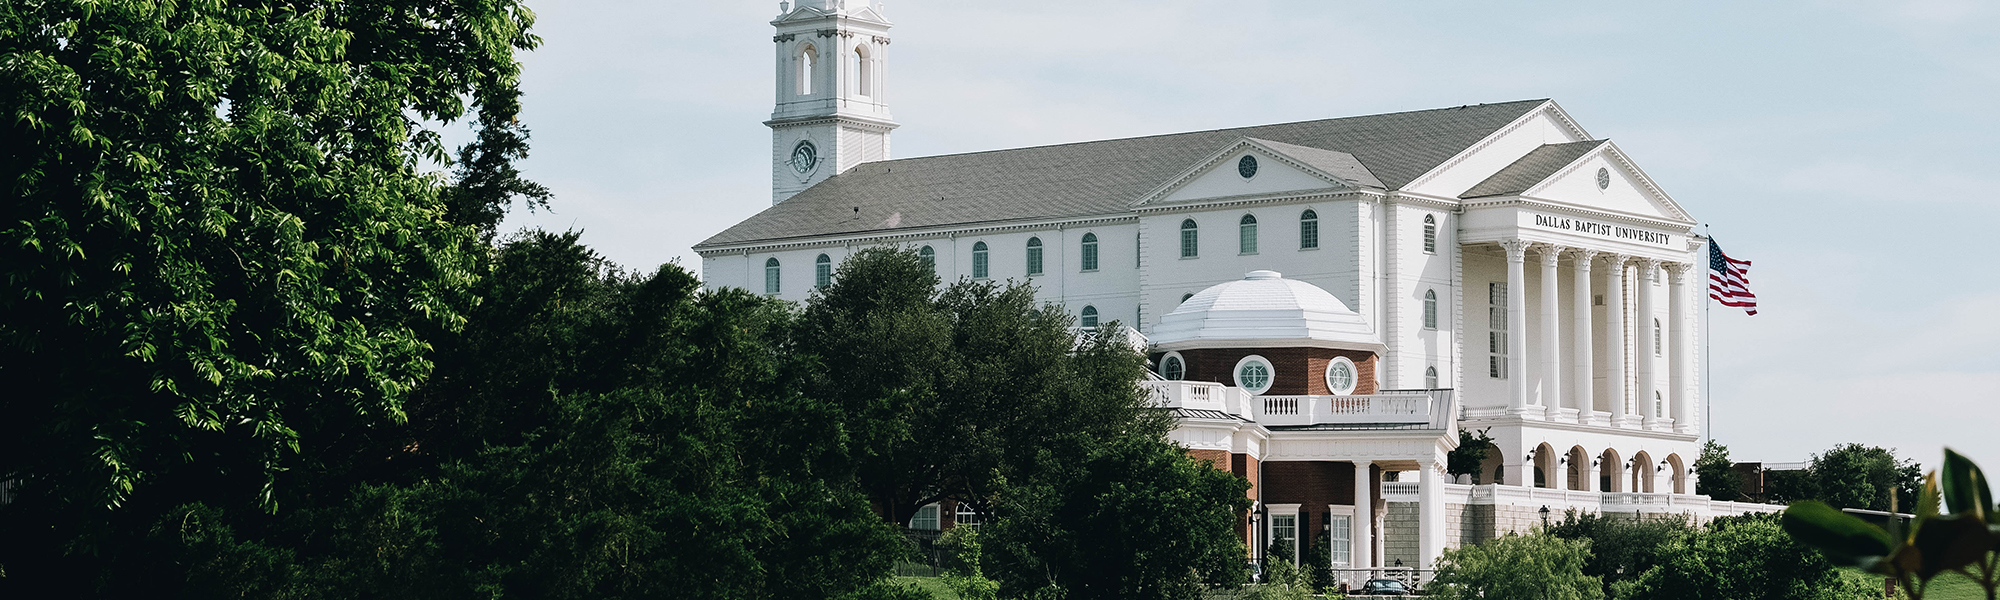 DBU campus - nation hall and chapel